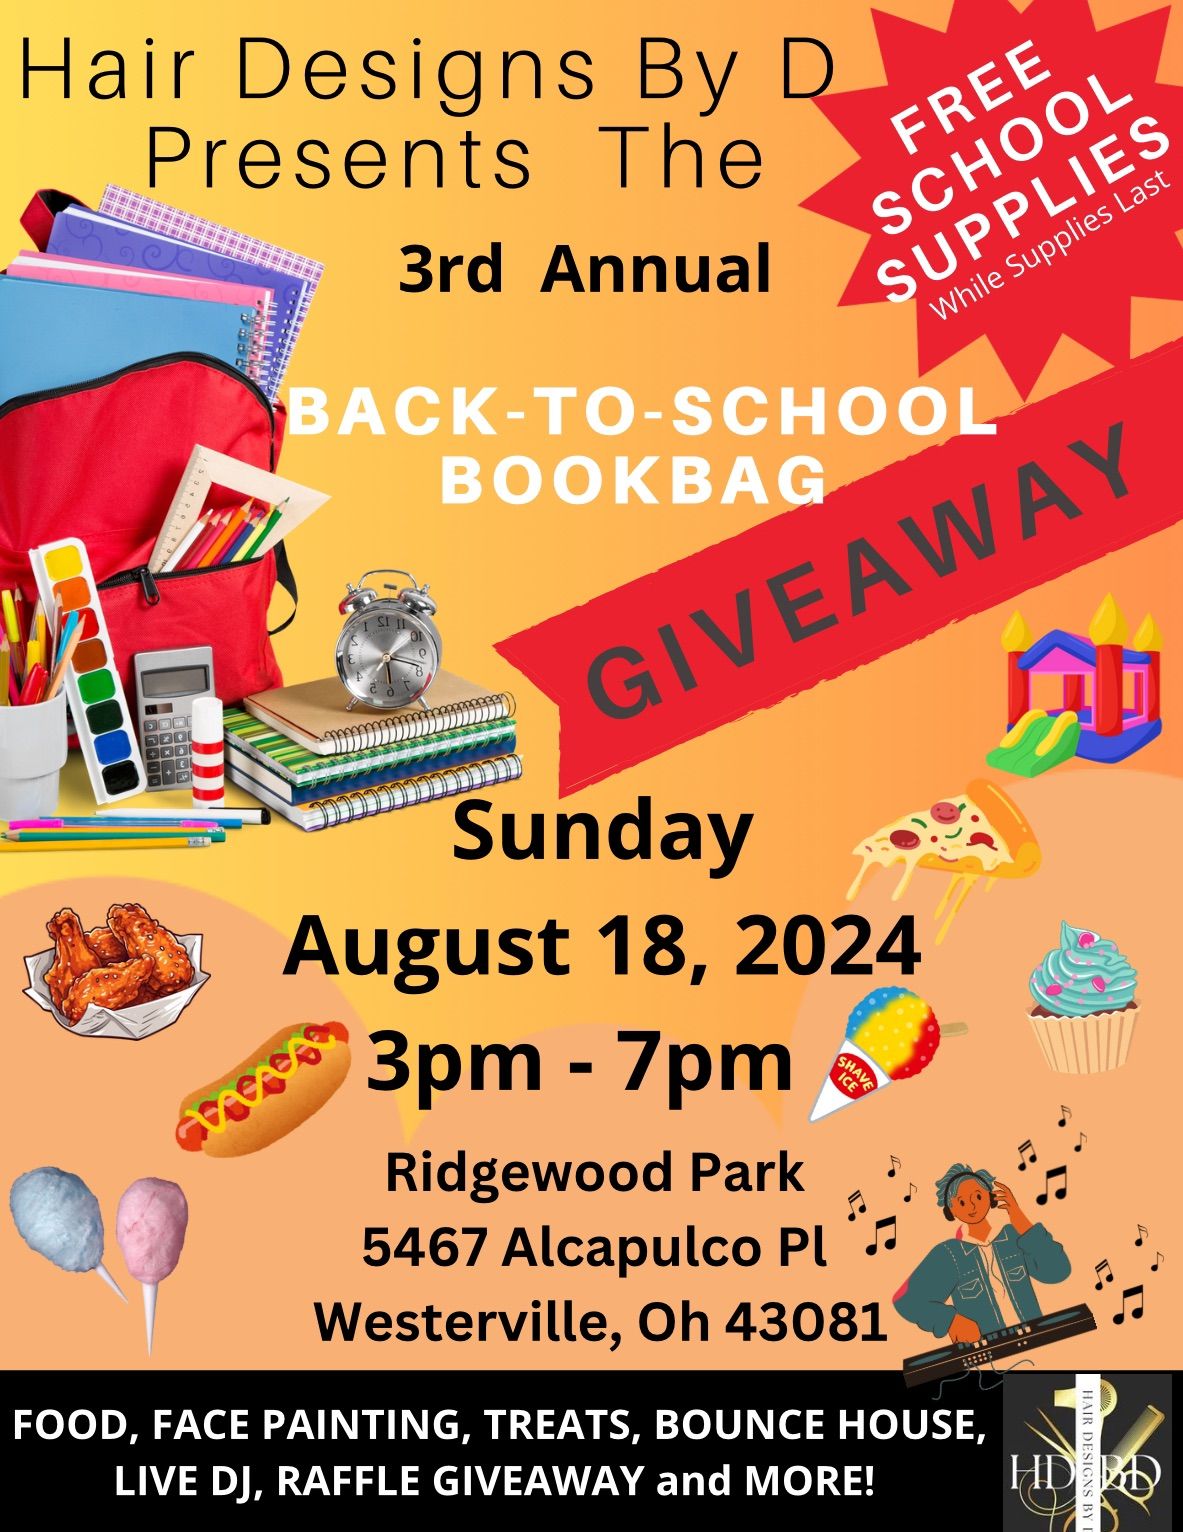 Hair Designs By D 3rd Annual Back-To-School Bookbag Giveaway